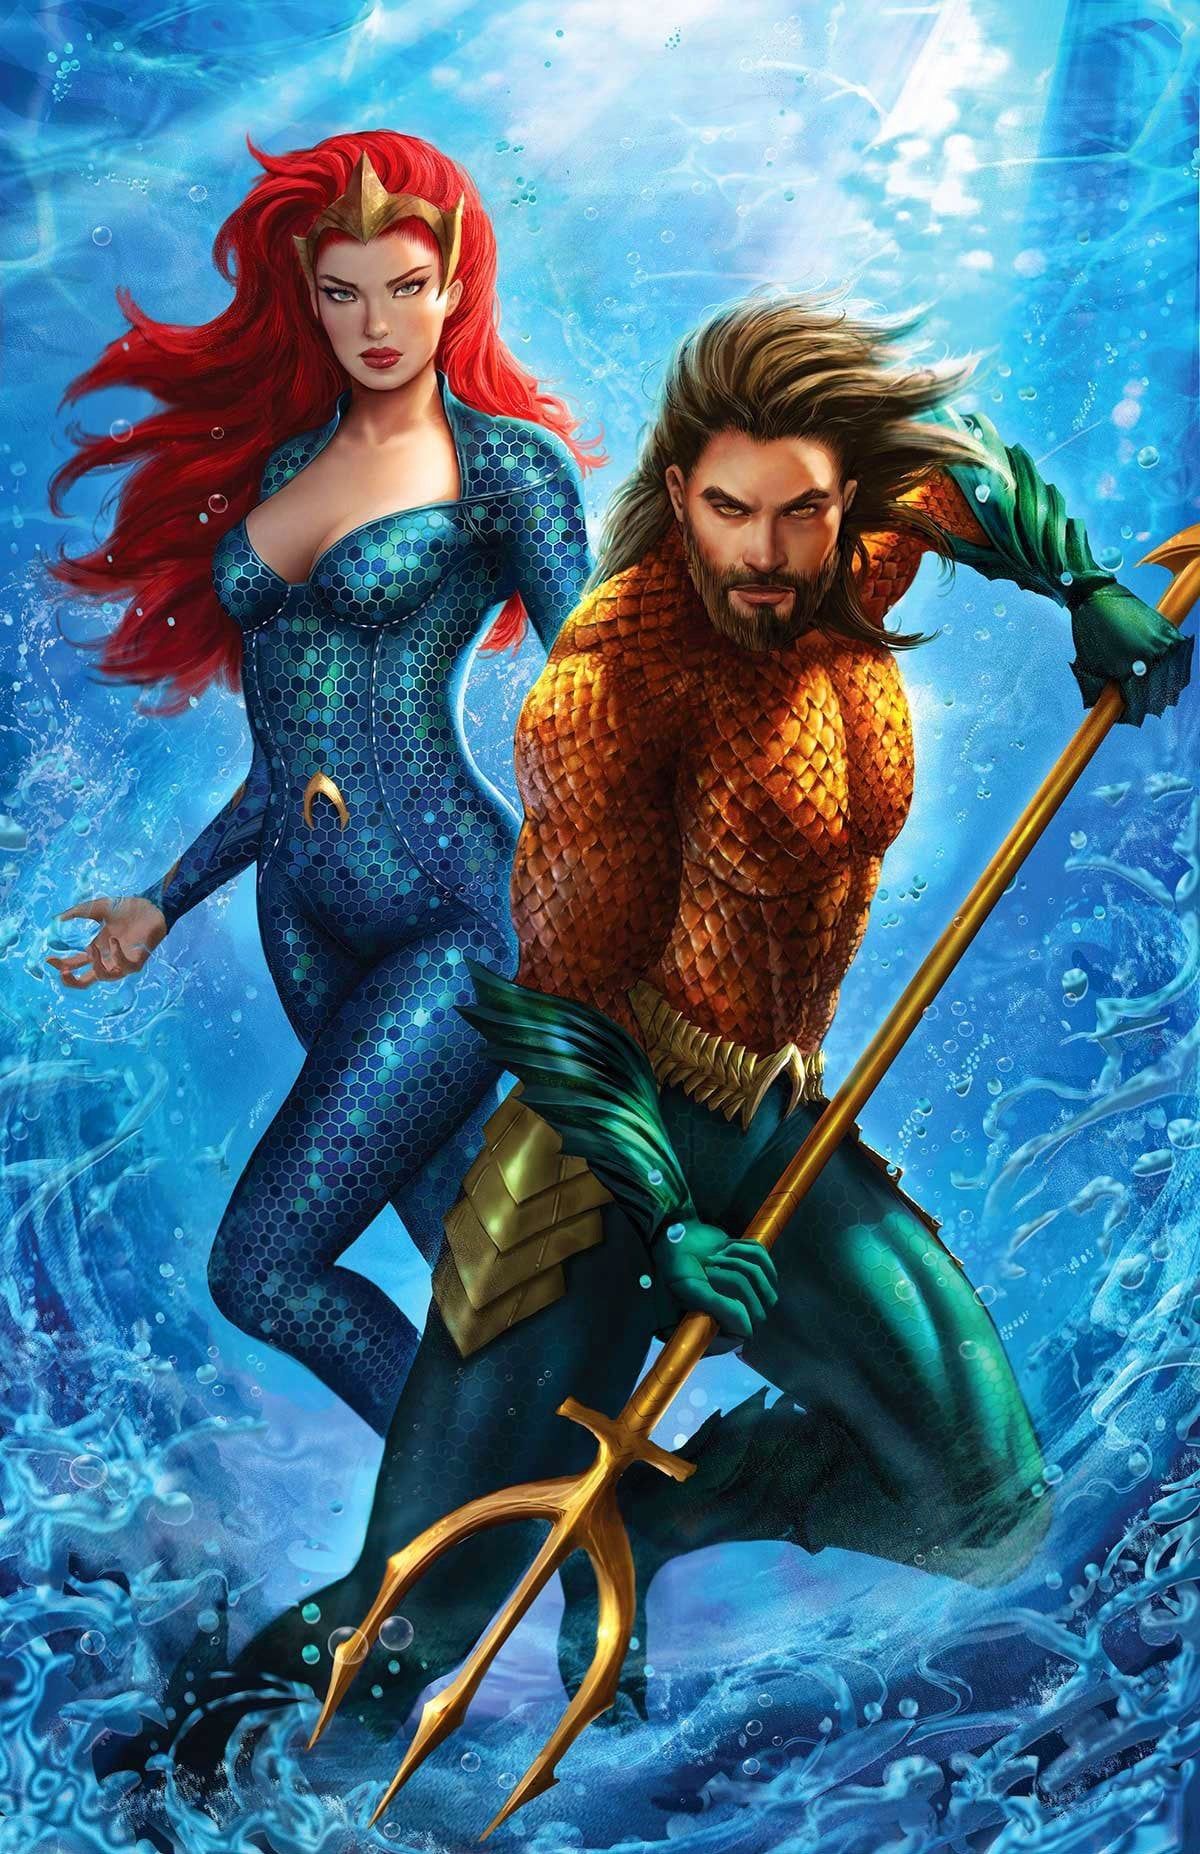  Aquaman And The Lost Kingdom Hintergrundbild 1200x1854. The first of December's AQUAMAN AND THE LOST KINGDOM variant covers has been revealed for BIRDS OF PREY with art by Sun Khamunaki!